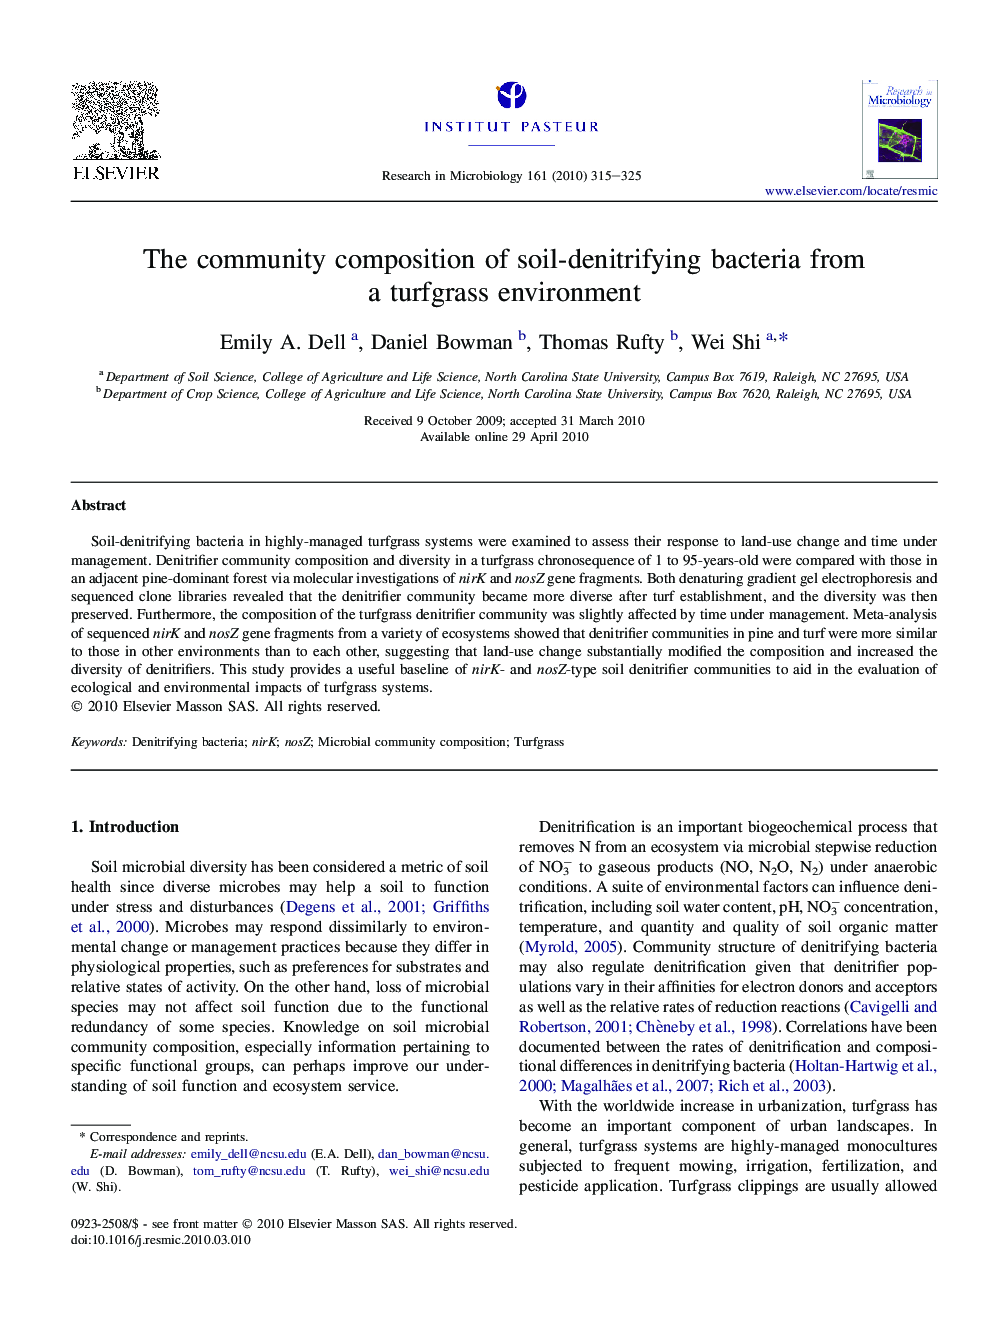 The community composition of soil-denitrifying bacteria from a turfgrass environment